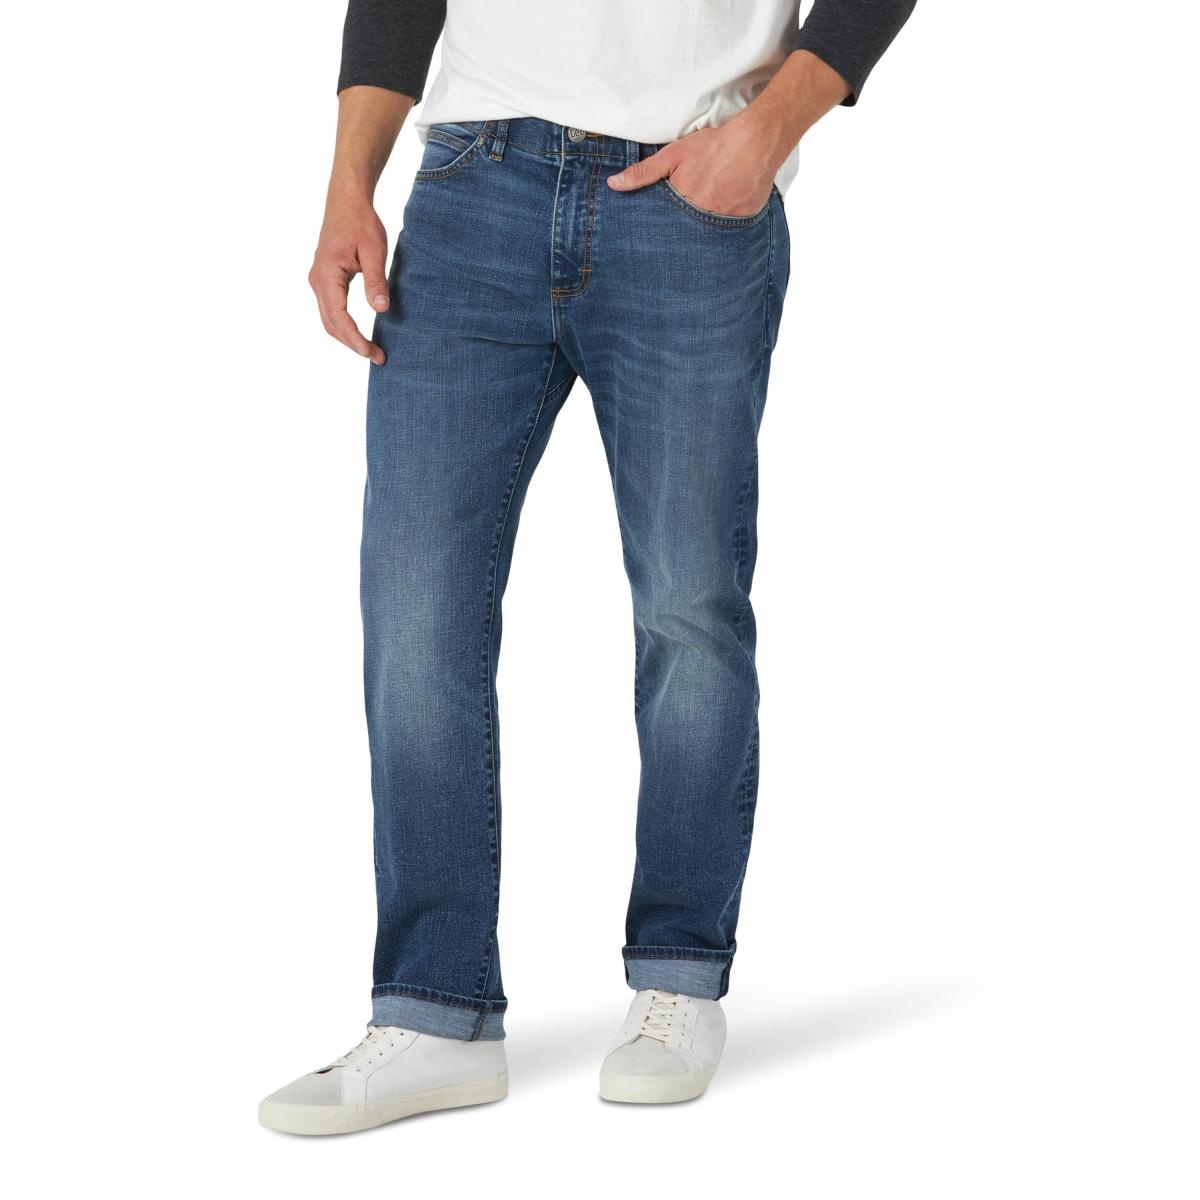 Lee Men's Extreme Motion Athletic Tapered Leg Jean